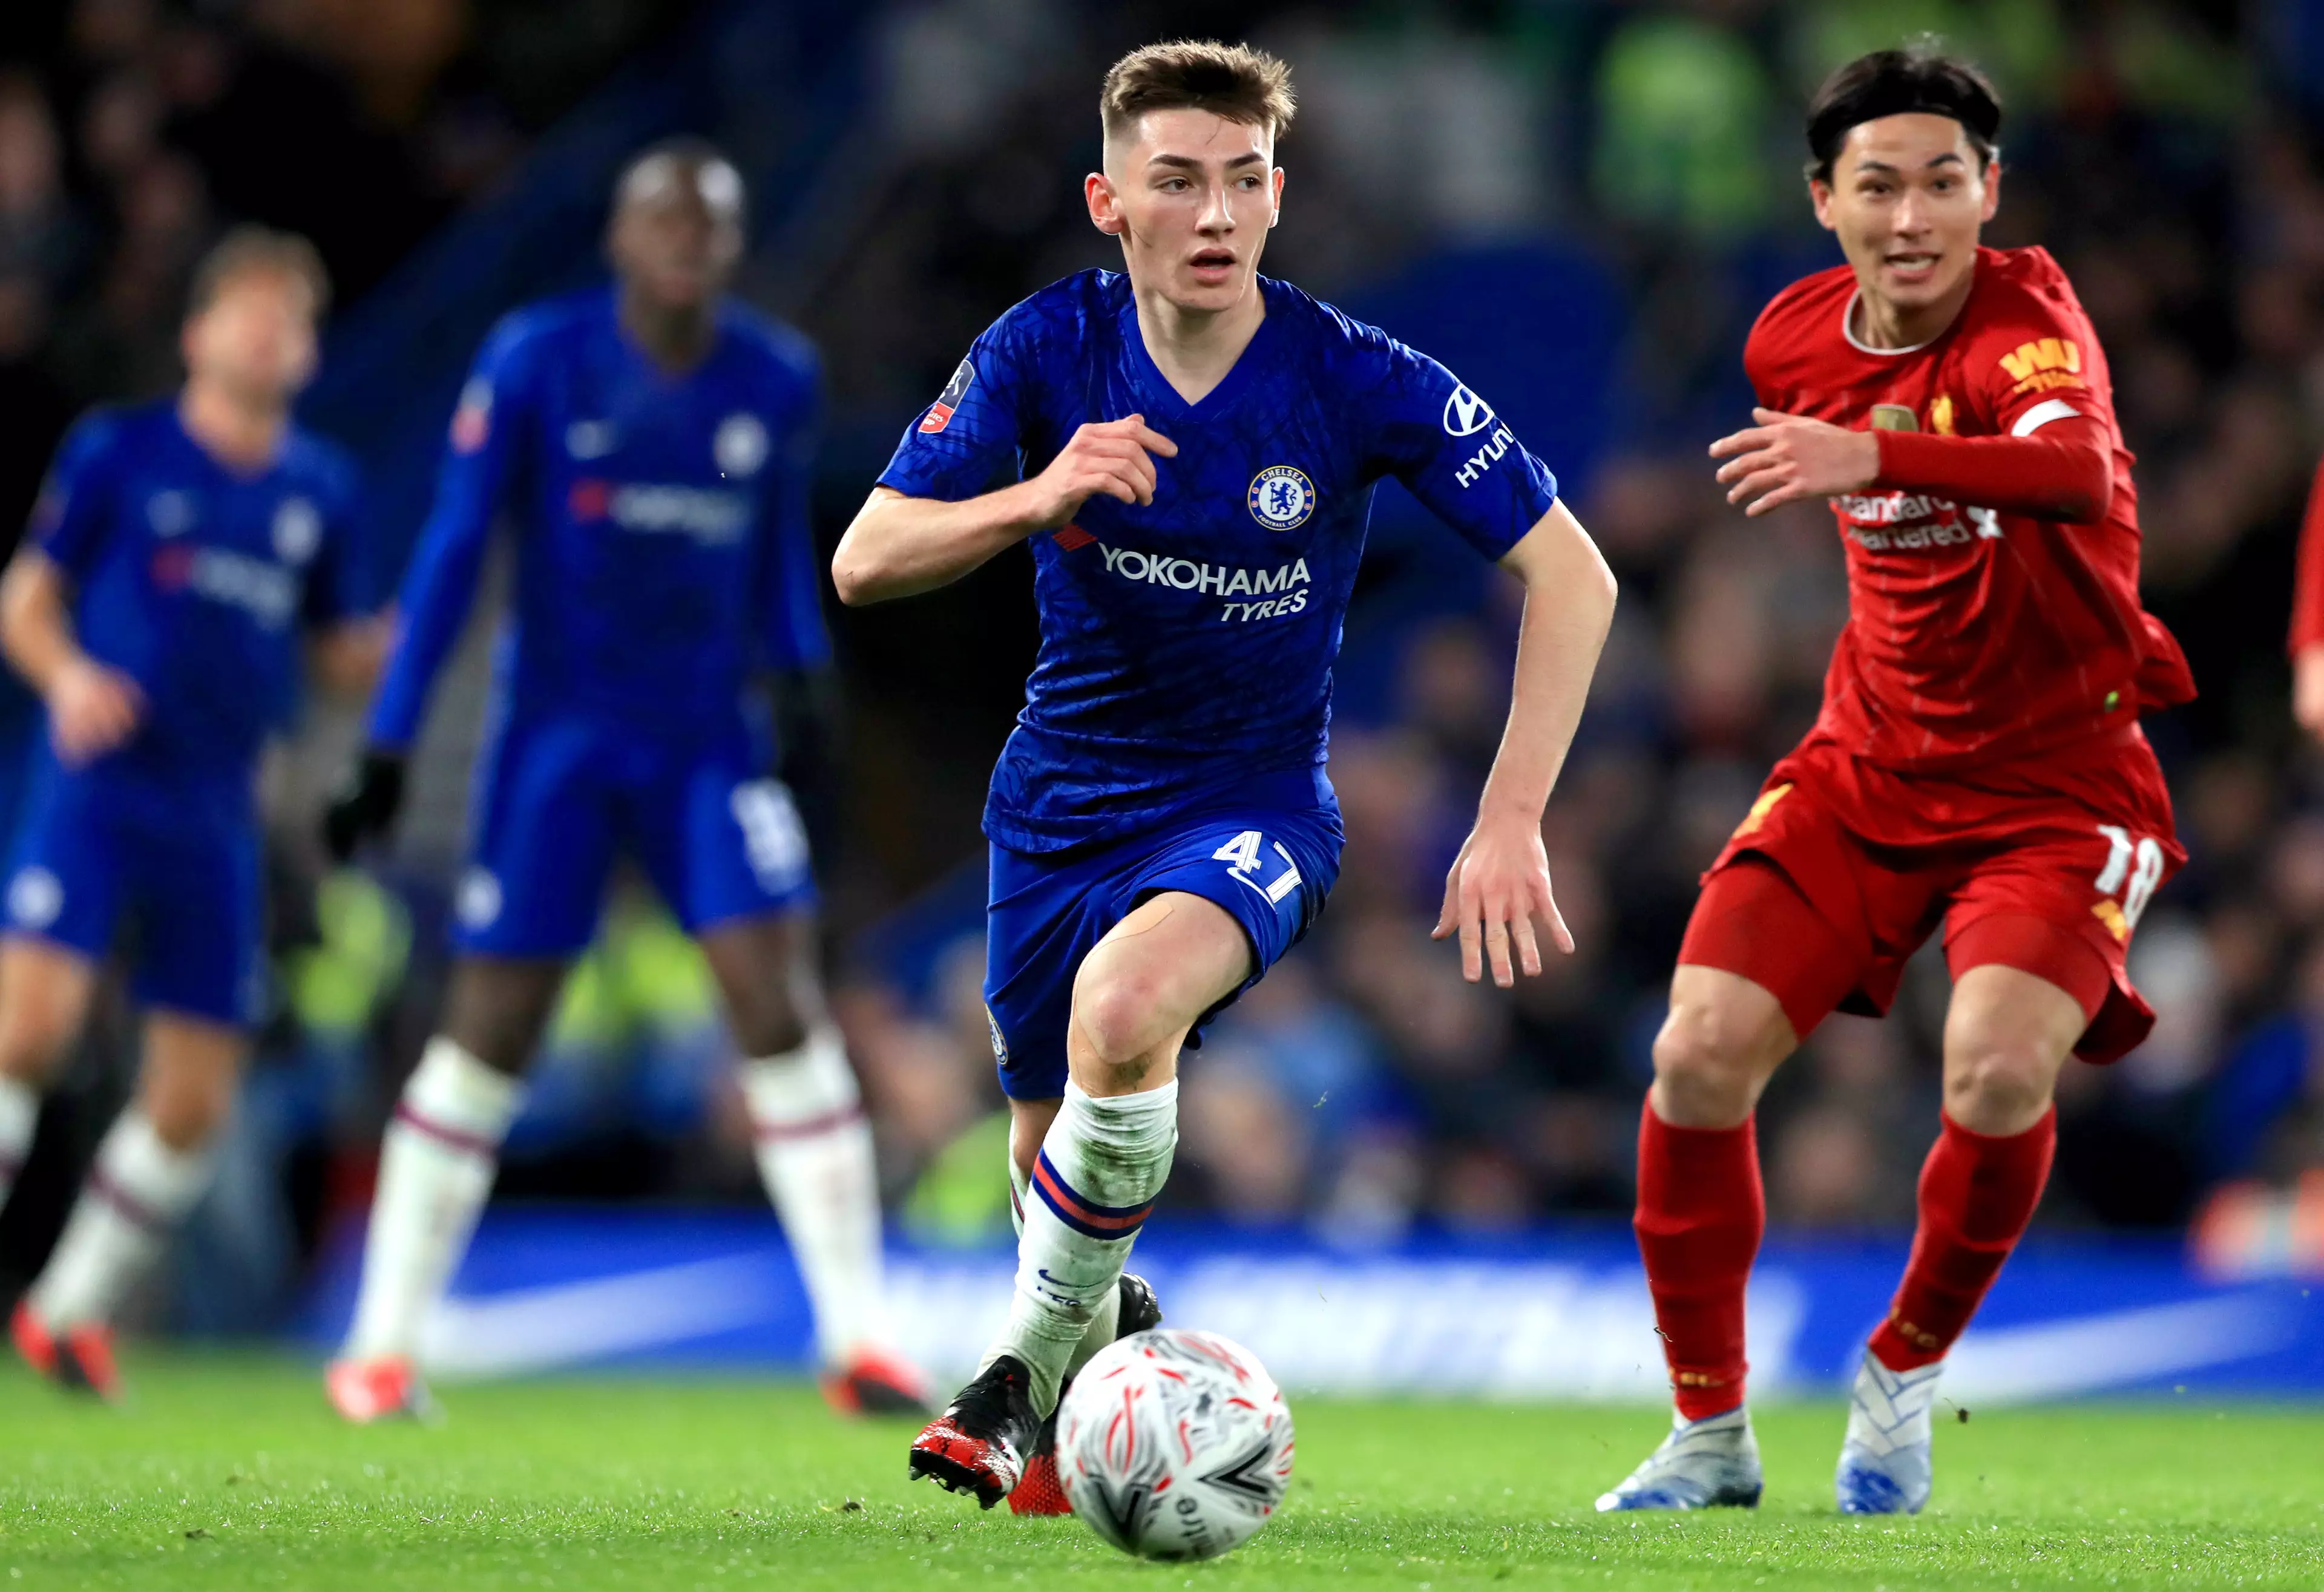 Billy Gilmour enjoyed a star-making performance in FA Cup victory over Liverpool in March. (Image